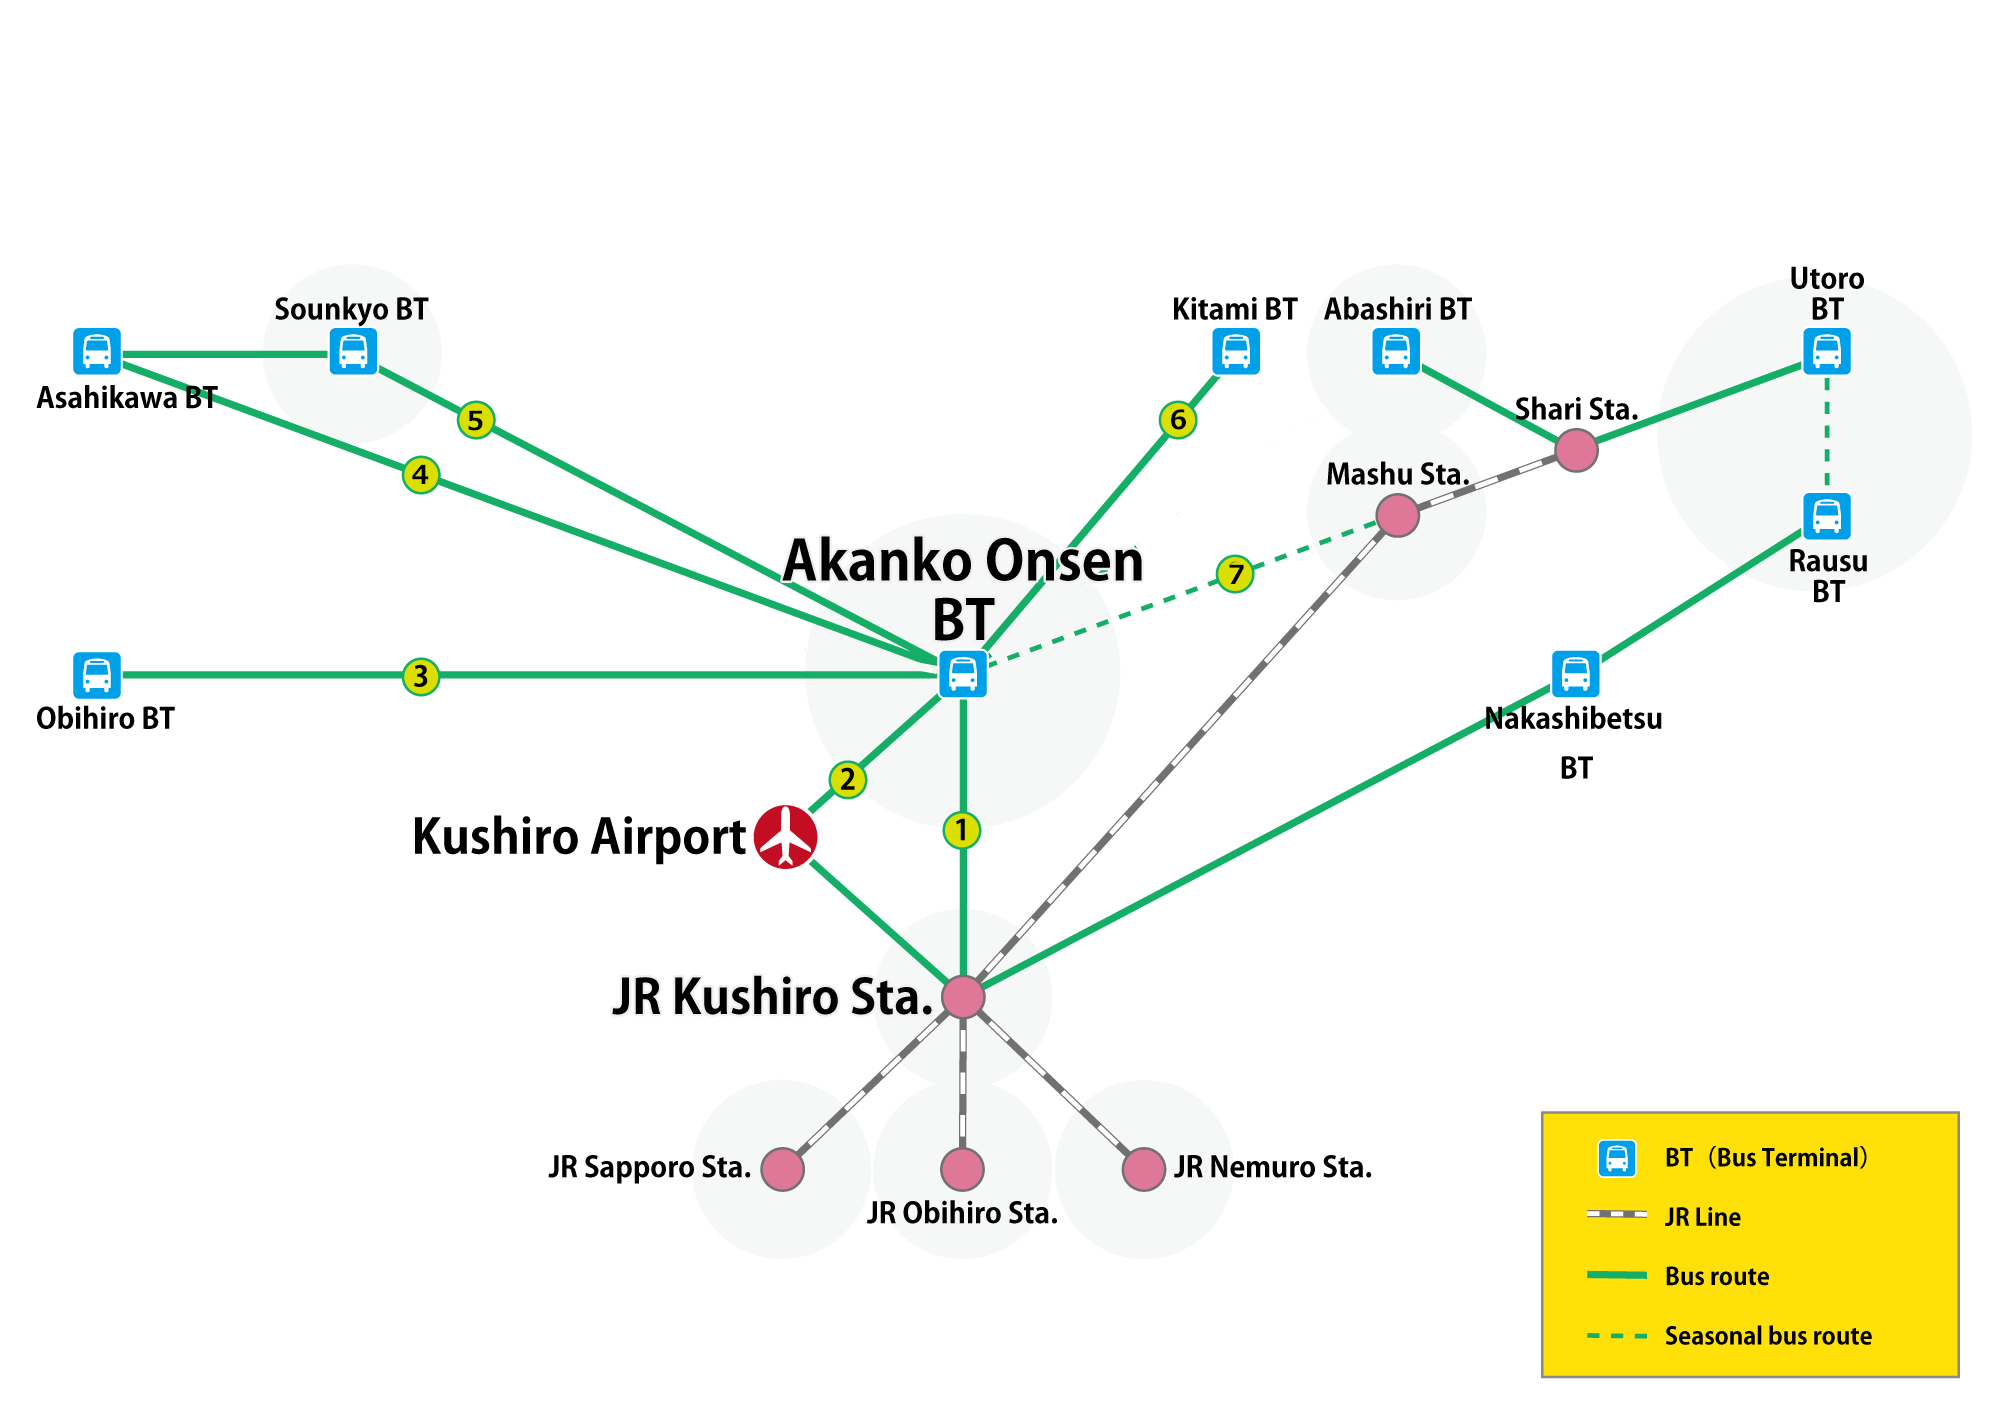 9 routes from Akanko Onsen